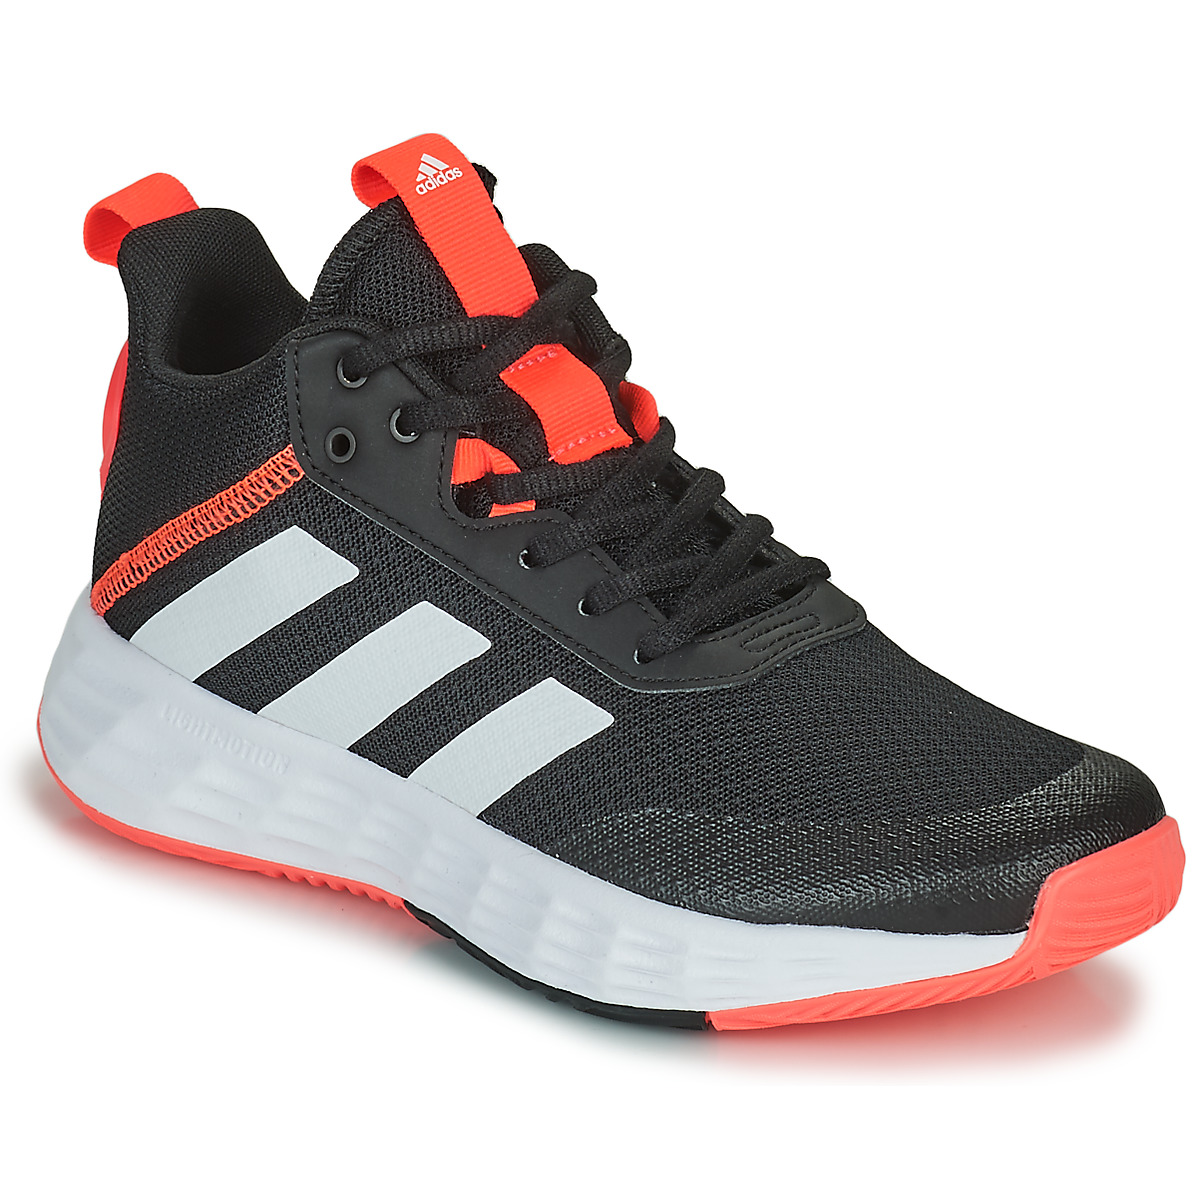 Shoes Sportswear Red Basketball K - - Free Child ! / Spartoo shoes Black NET | Adidas delivery 2.0 OWNTHEGAME